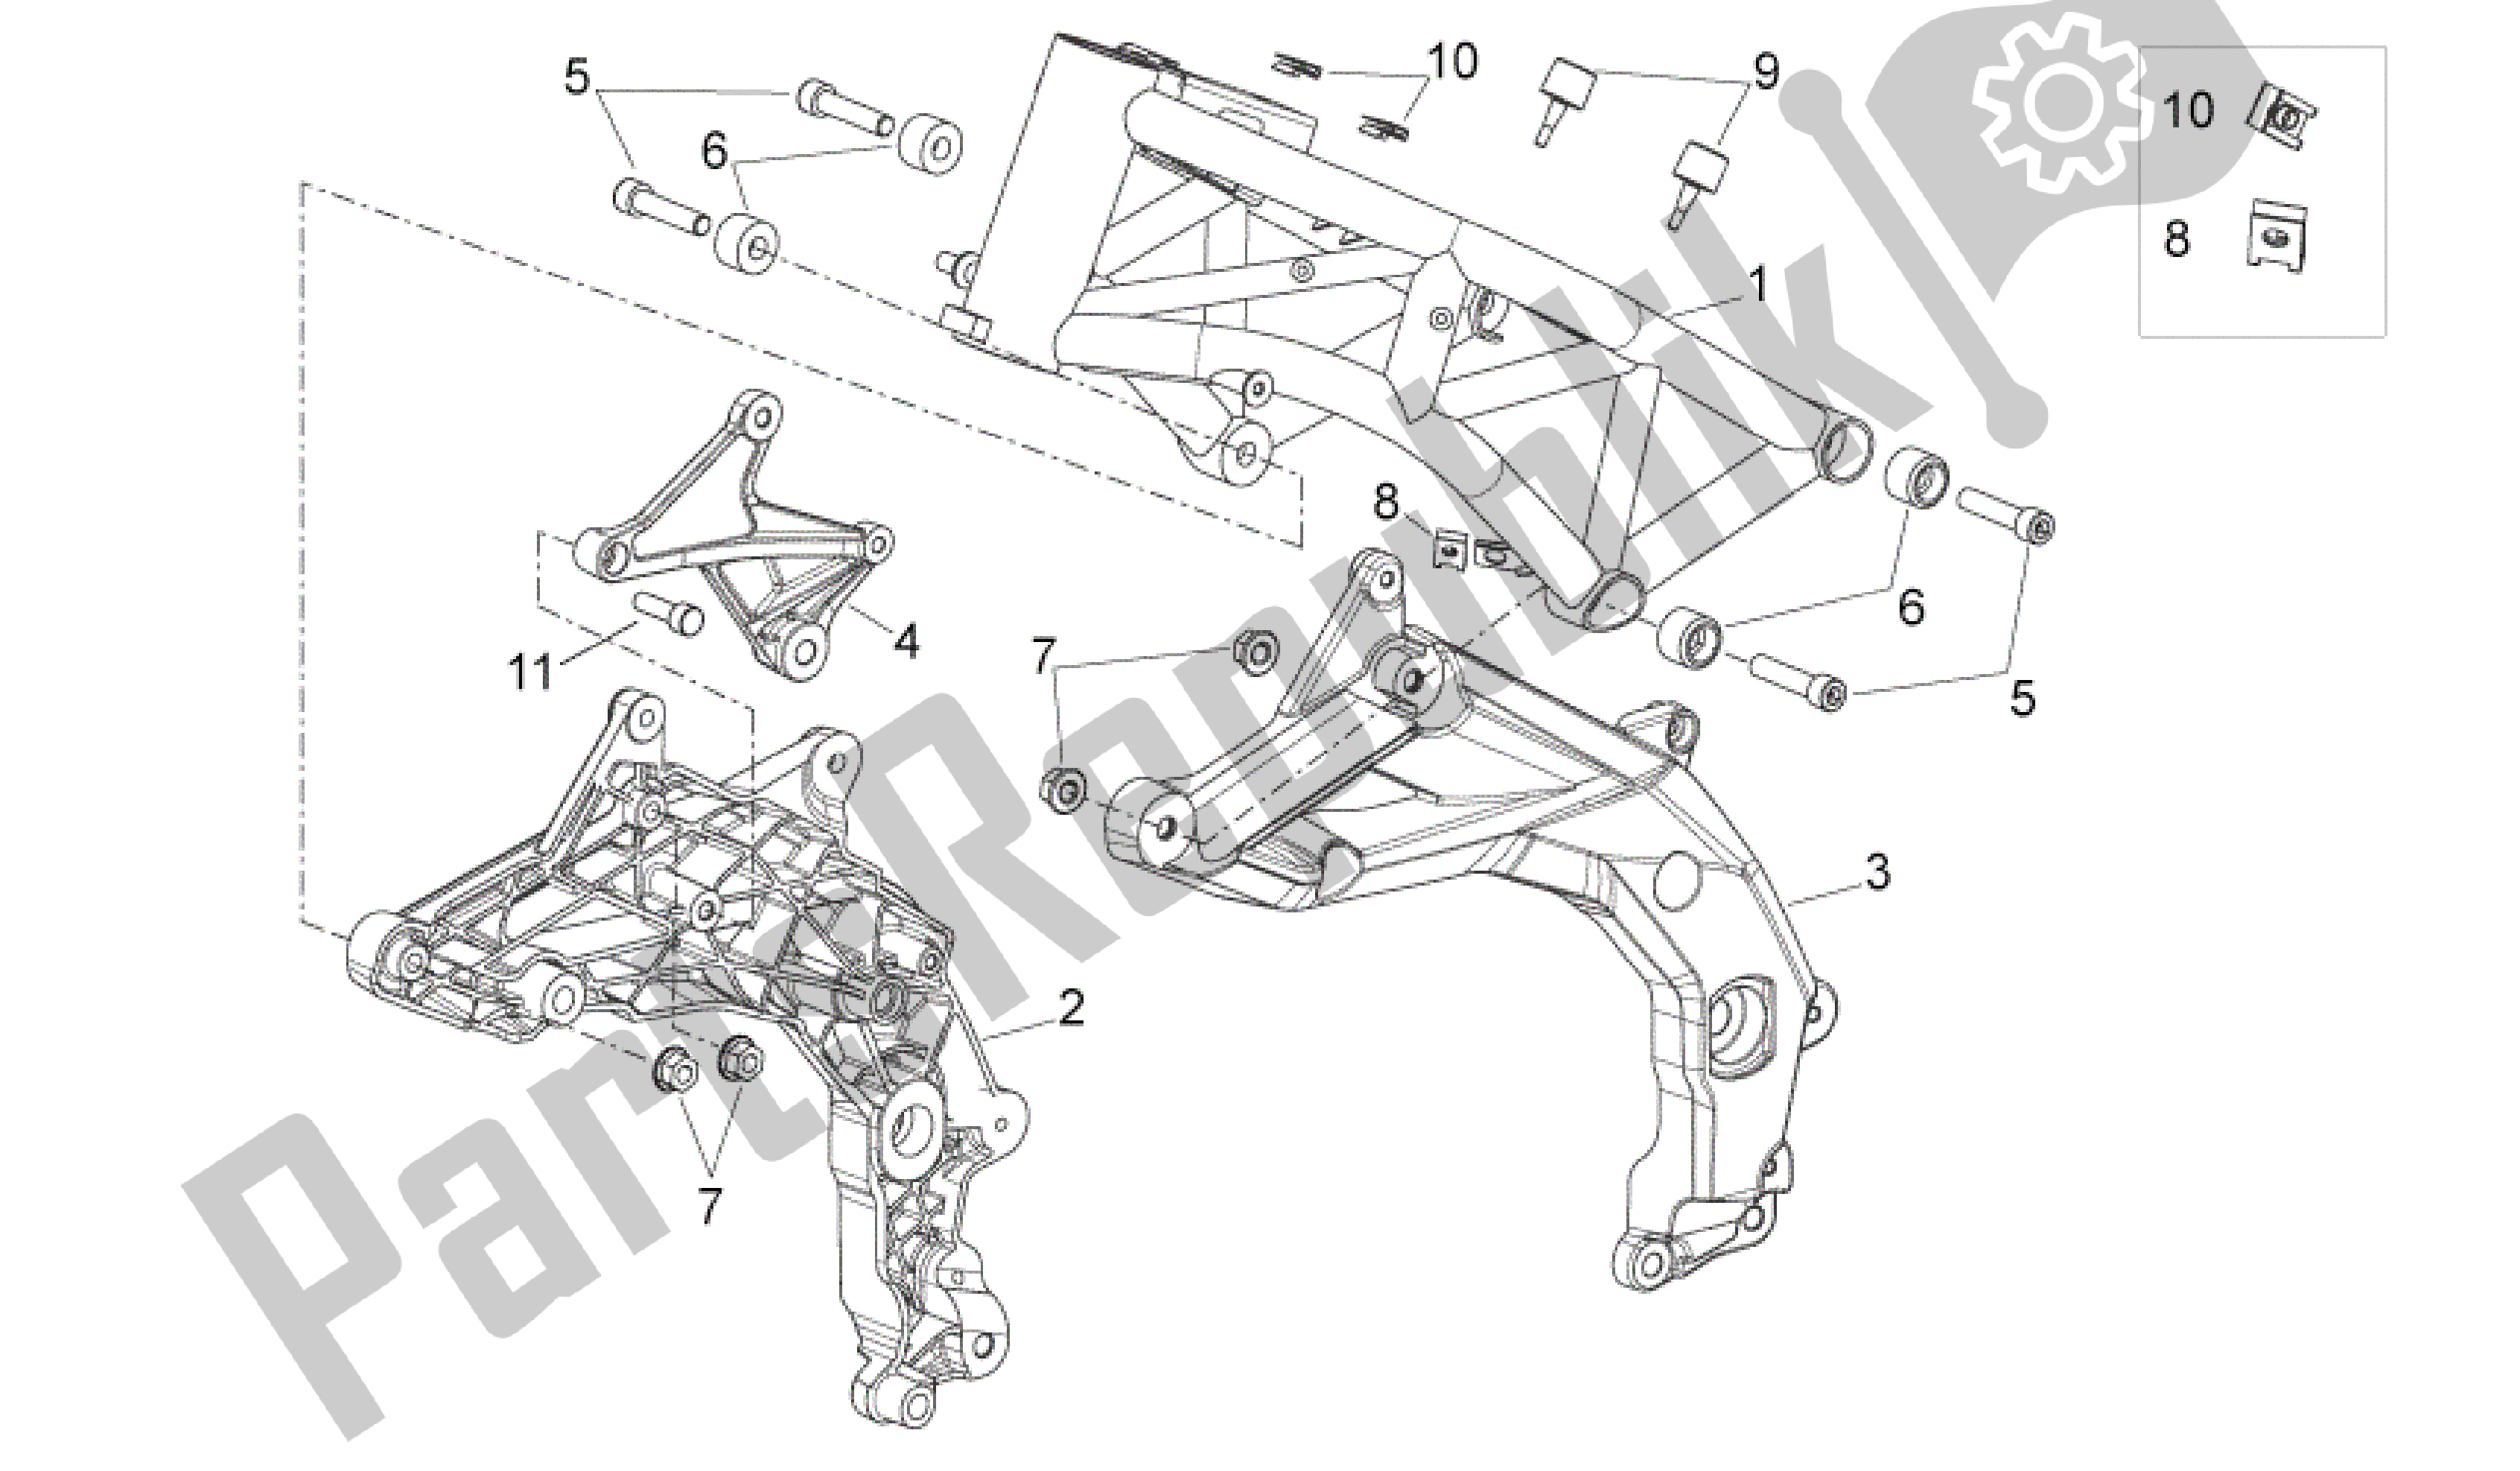 All parts for the Frame I of the Aprilia Shiver 750 2011 - 2013